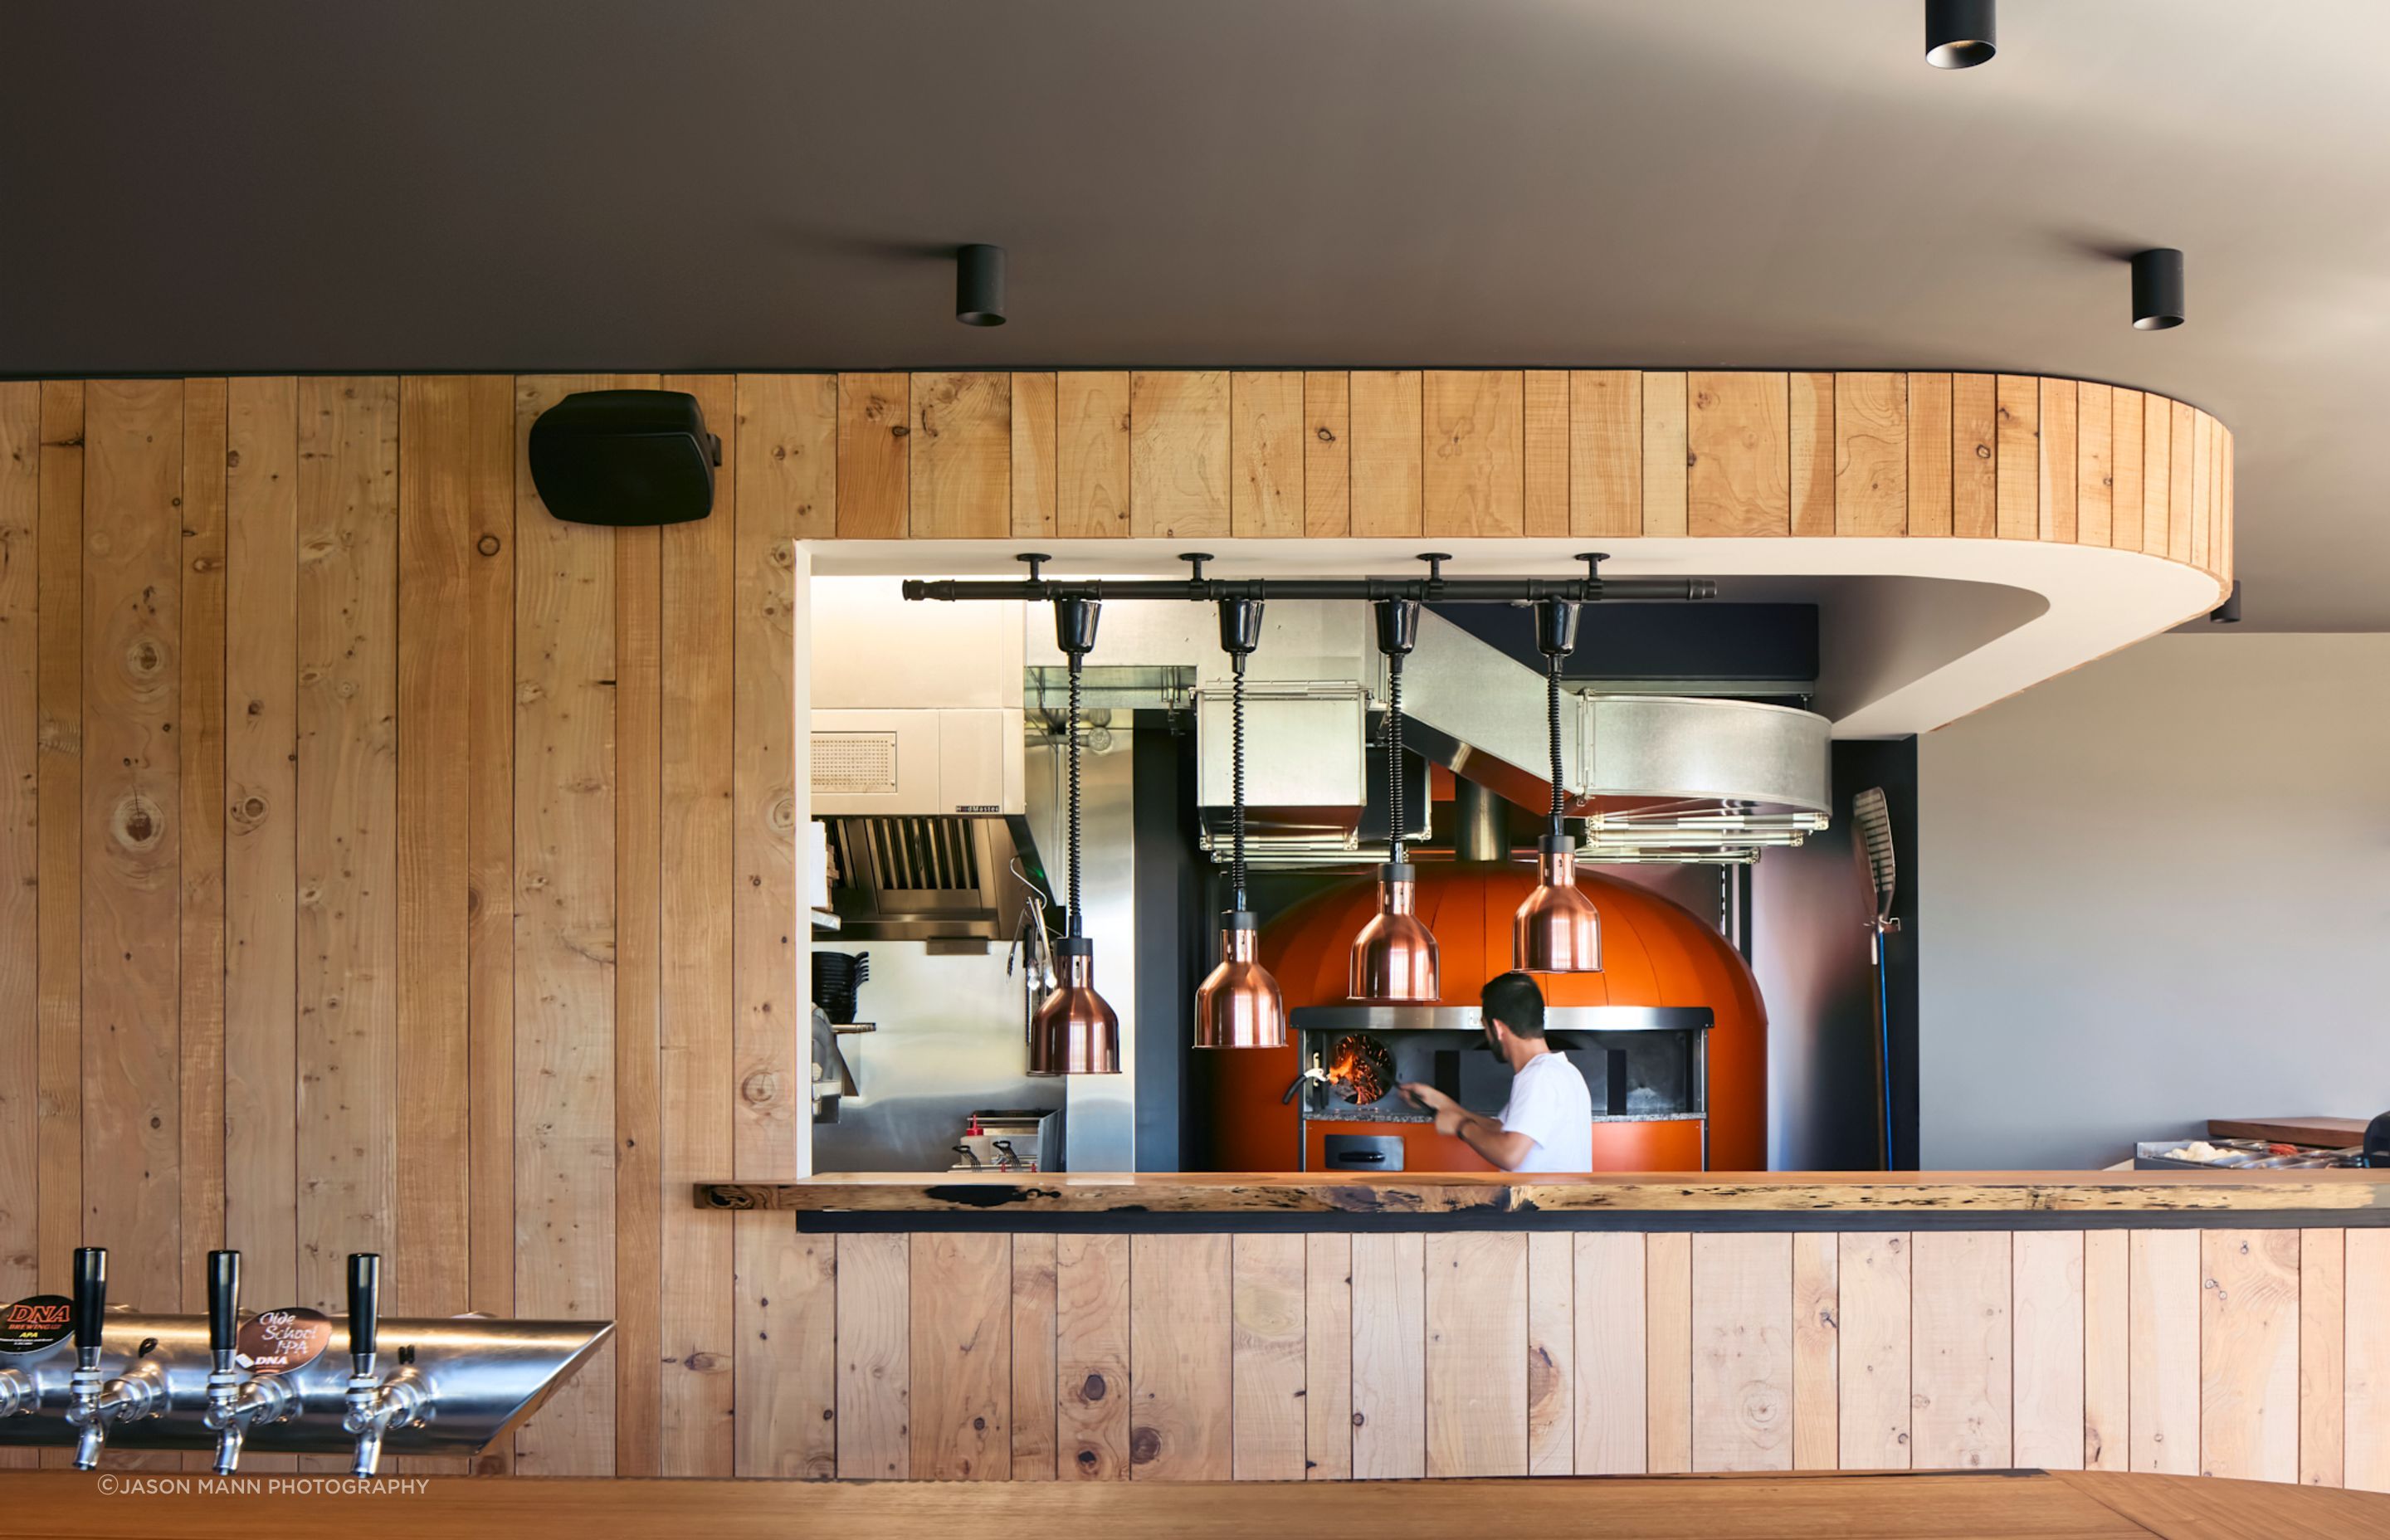 The commercial kitchen is on display, framed by Himalayan cedar panelling felled on the client's farm.